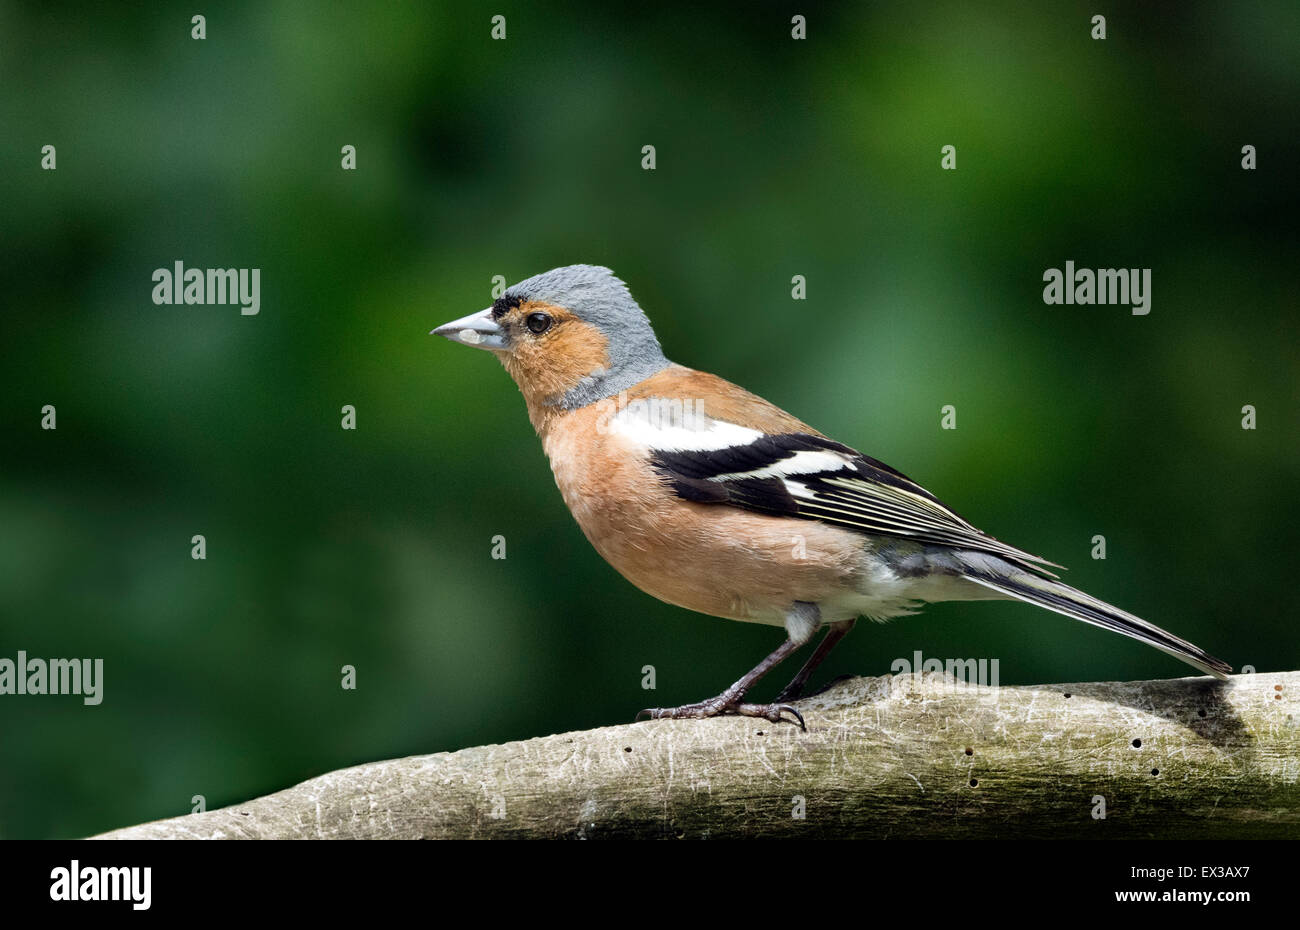 Single male Chaffinch perched on branch. Stock Photo